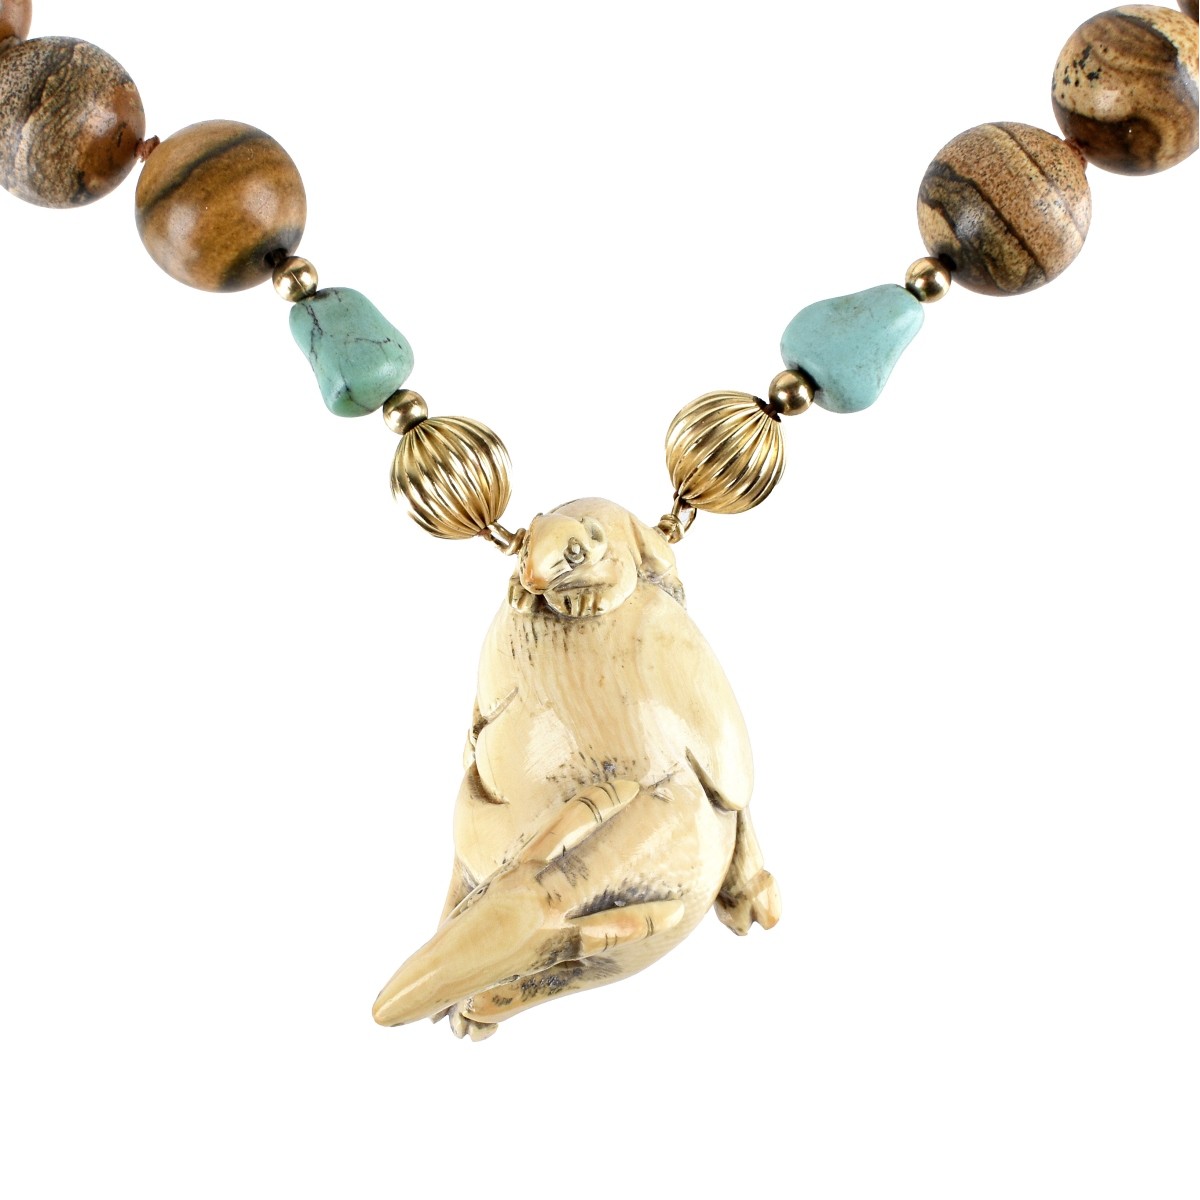 Agate and Turquoise Necklace